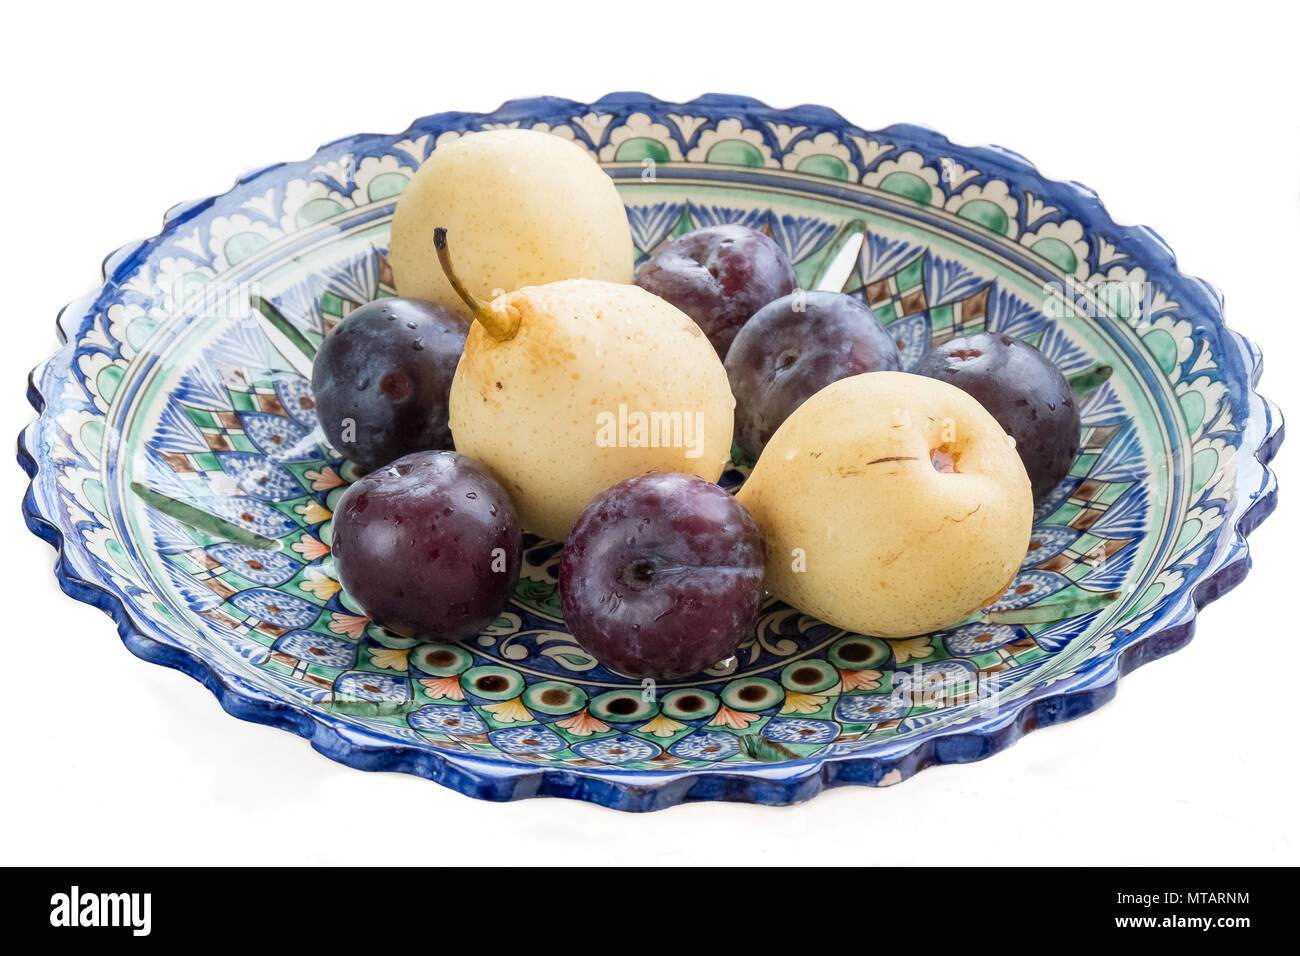 Pears and plums in an Uzbek bowl Stock Photo